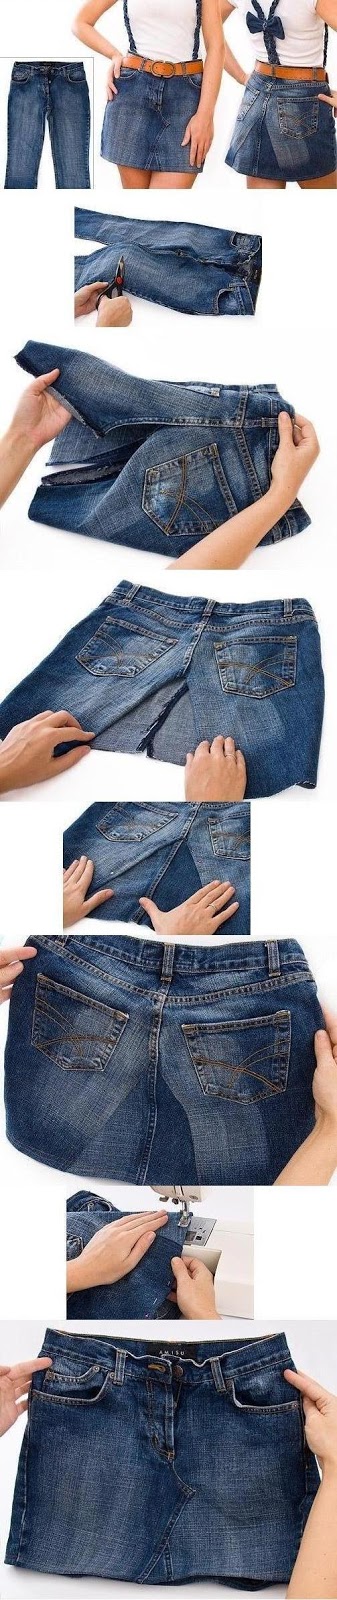 diy projects with old jeans